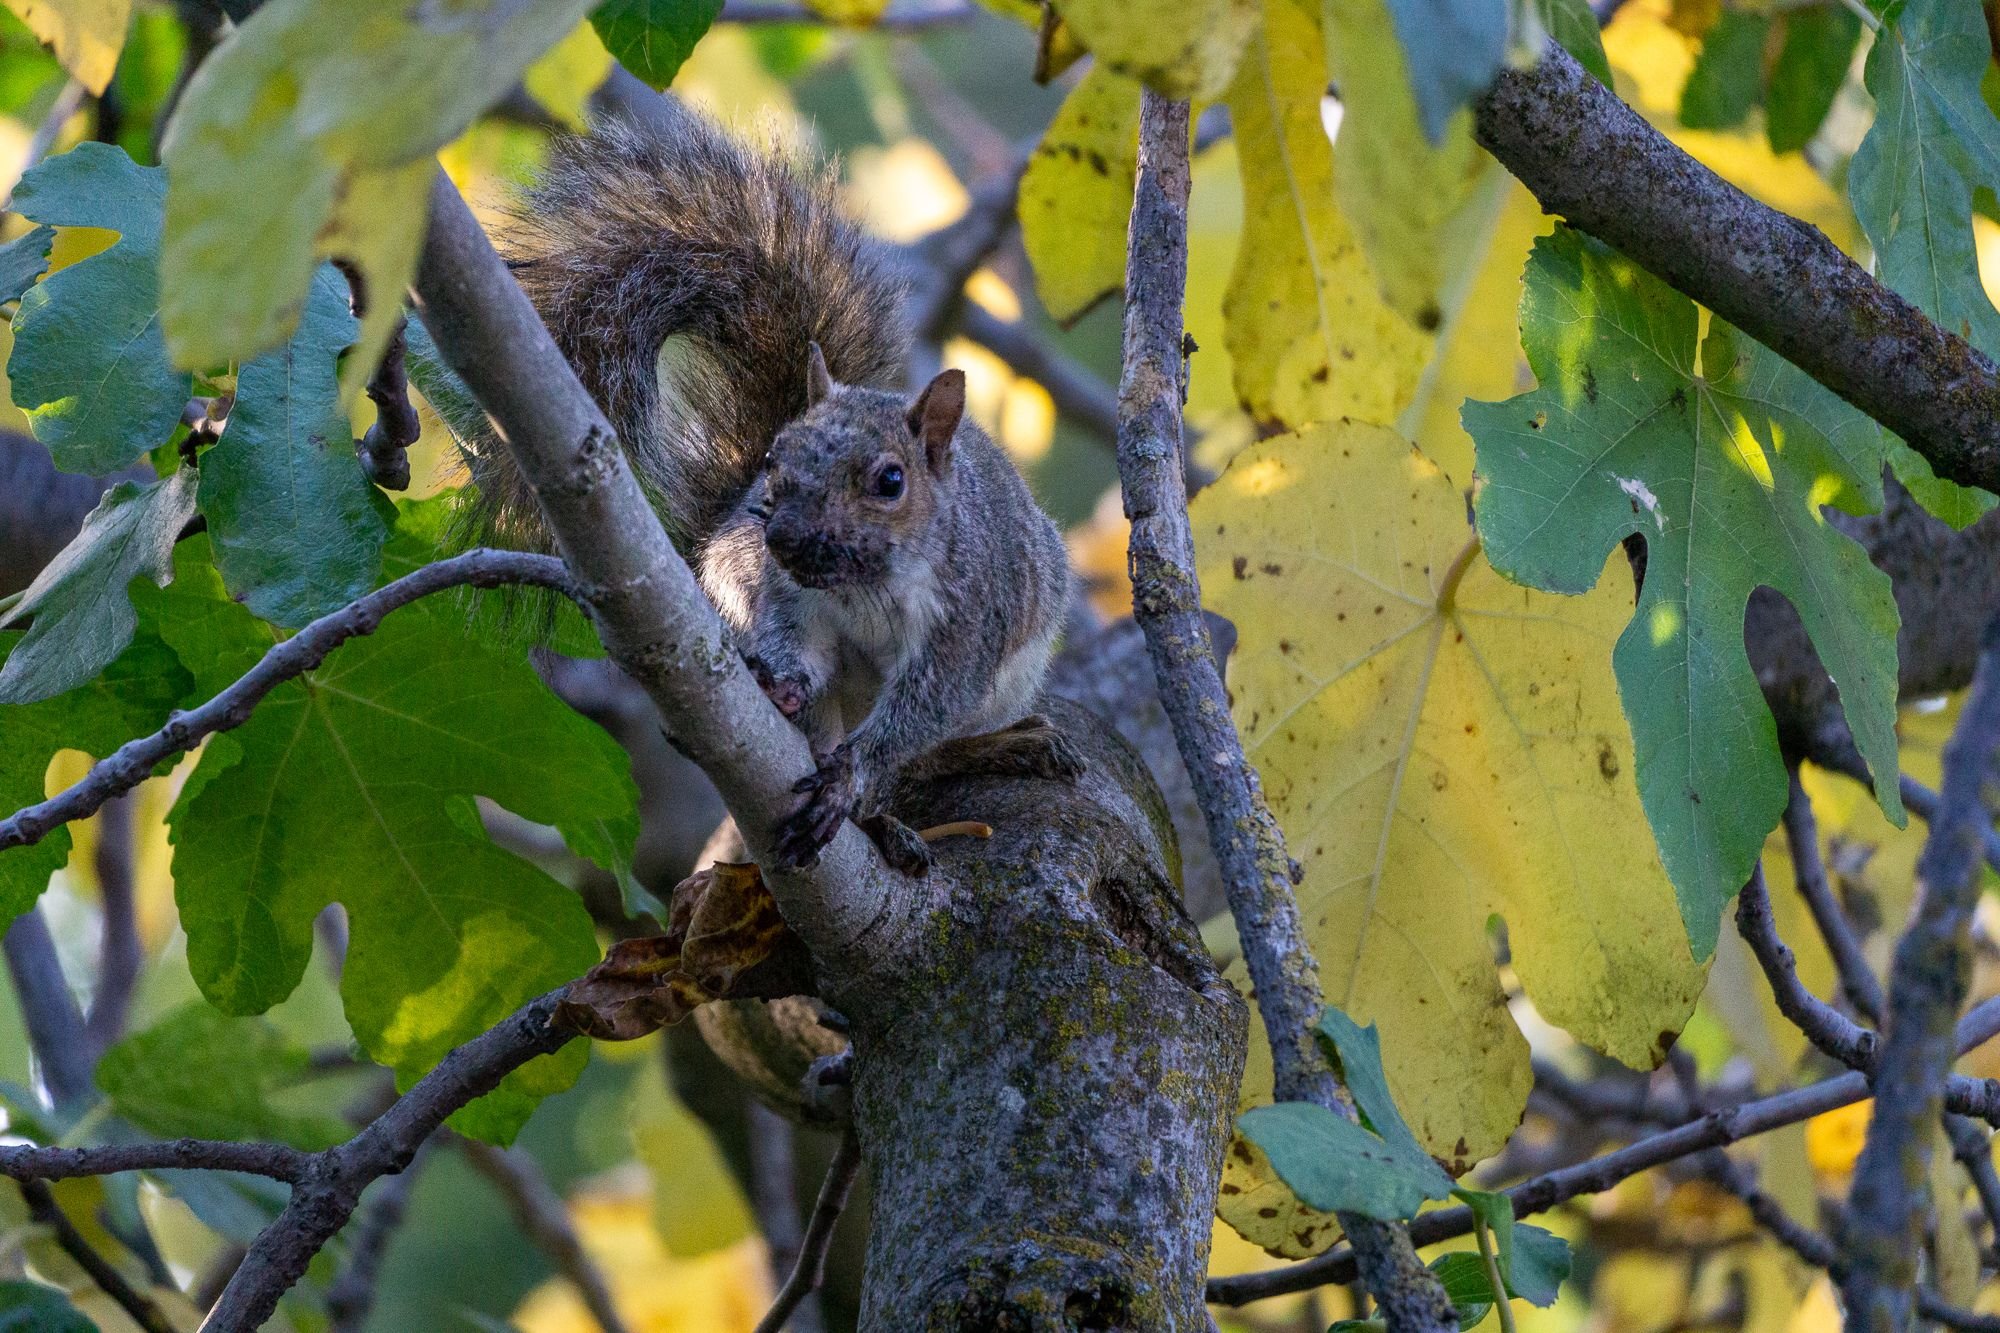 A gray squirrel on a branch in a tree.